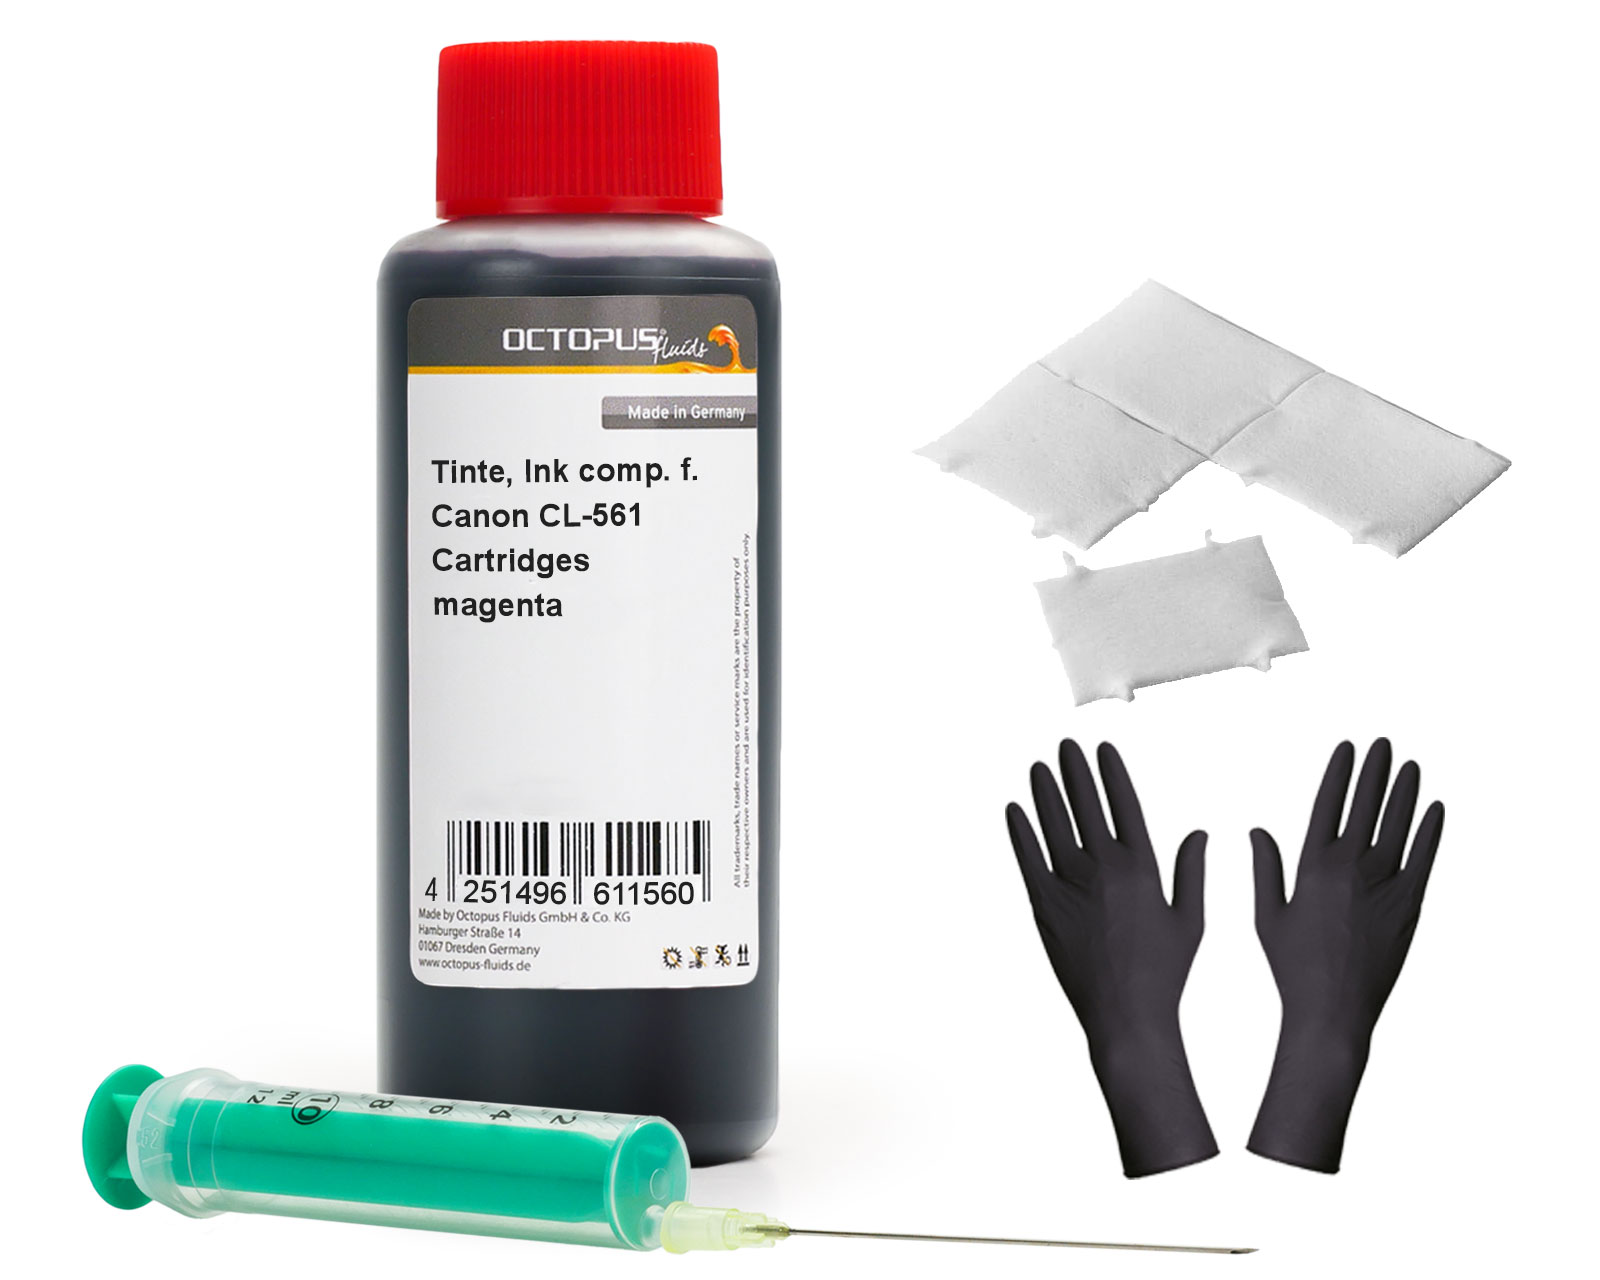 
Refill ink for Canon CL-561 ink cartridges, Canon Pixma TS 5300, 7400 magenta with syringe